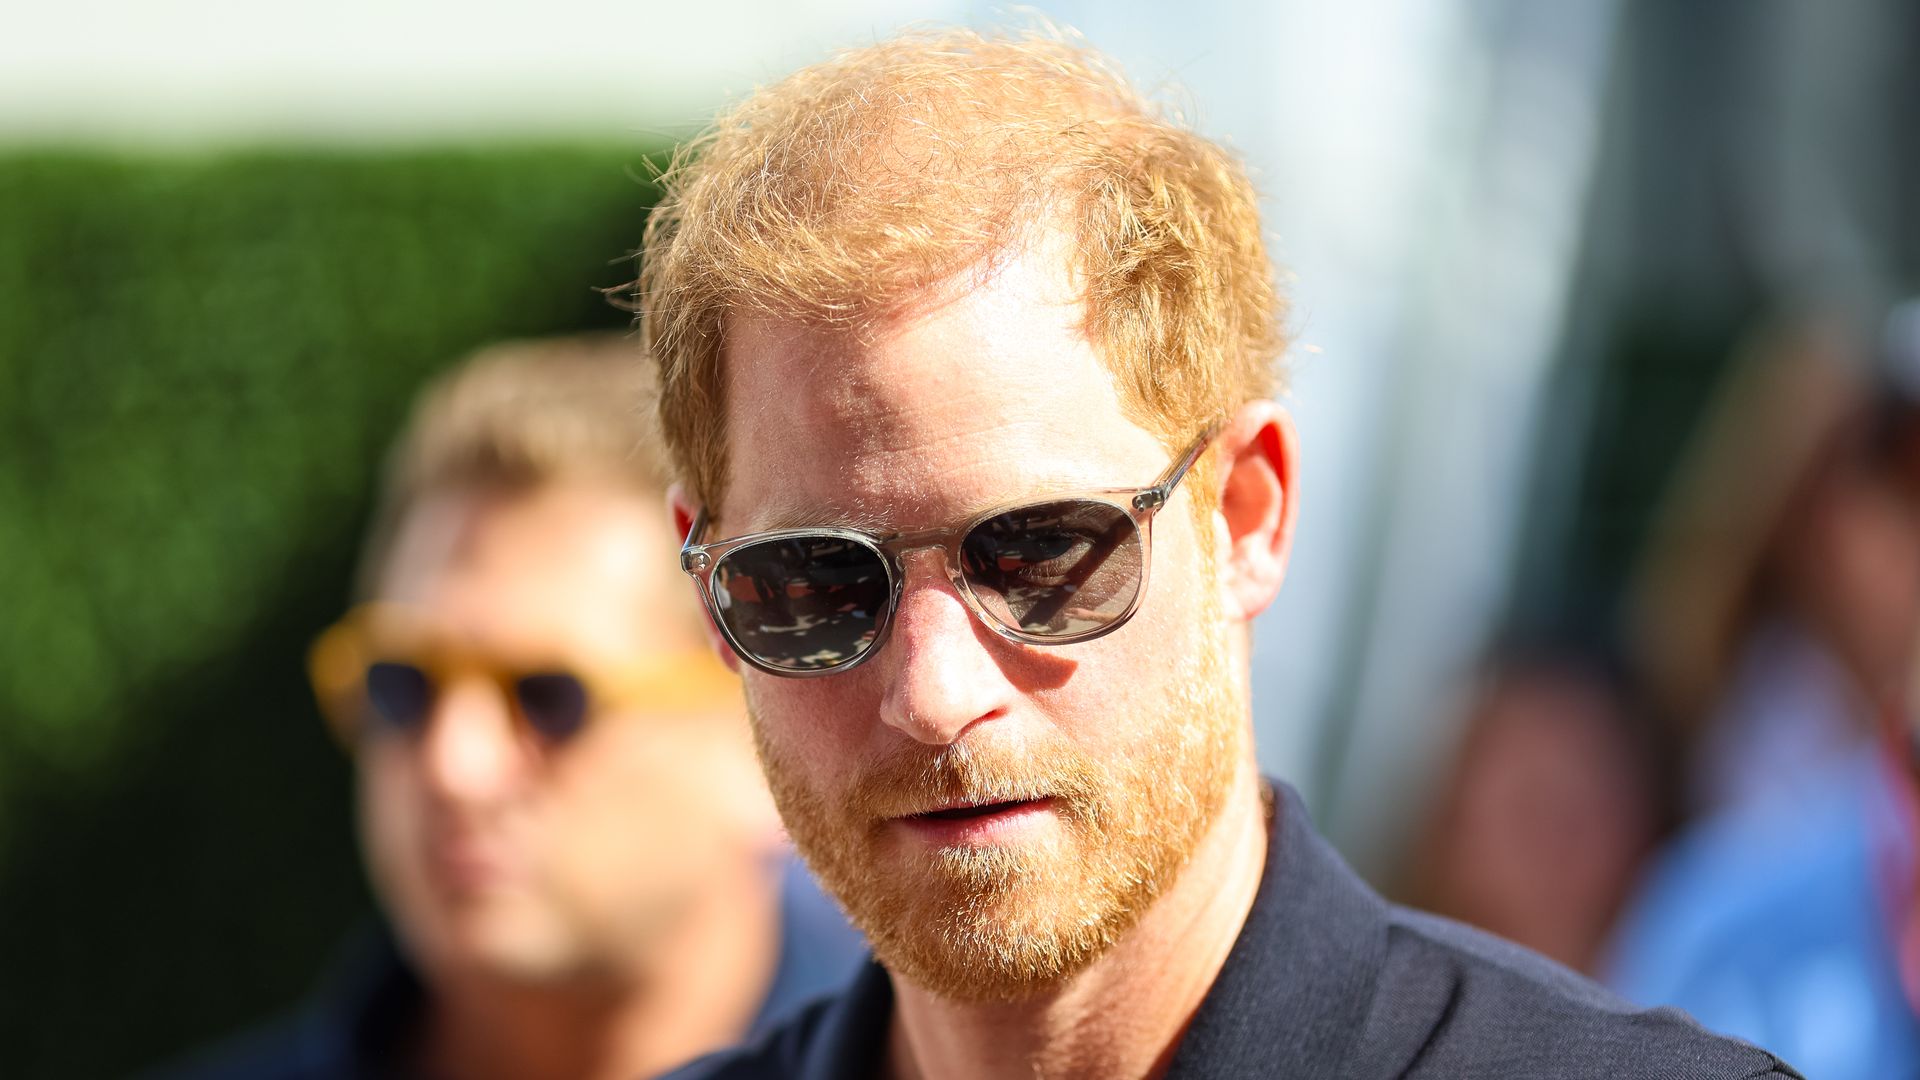 Prince Harry sends touching message to children after receiving emotional new role - read here